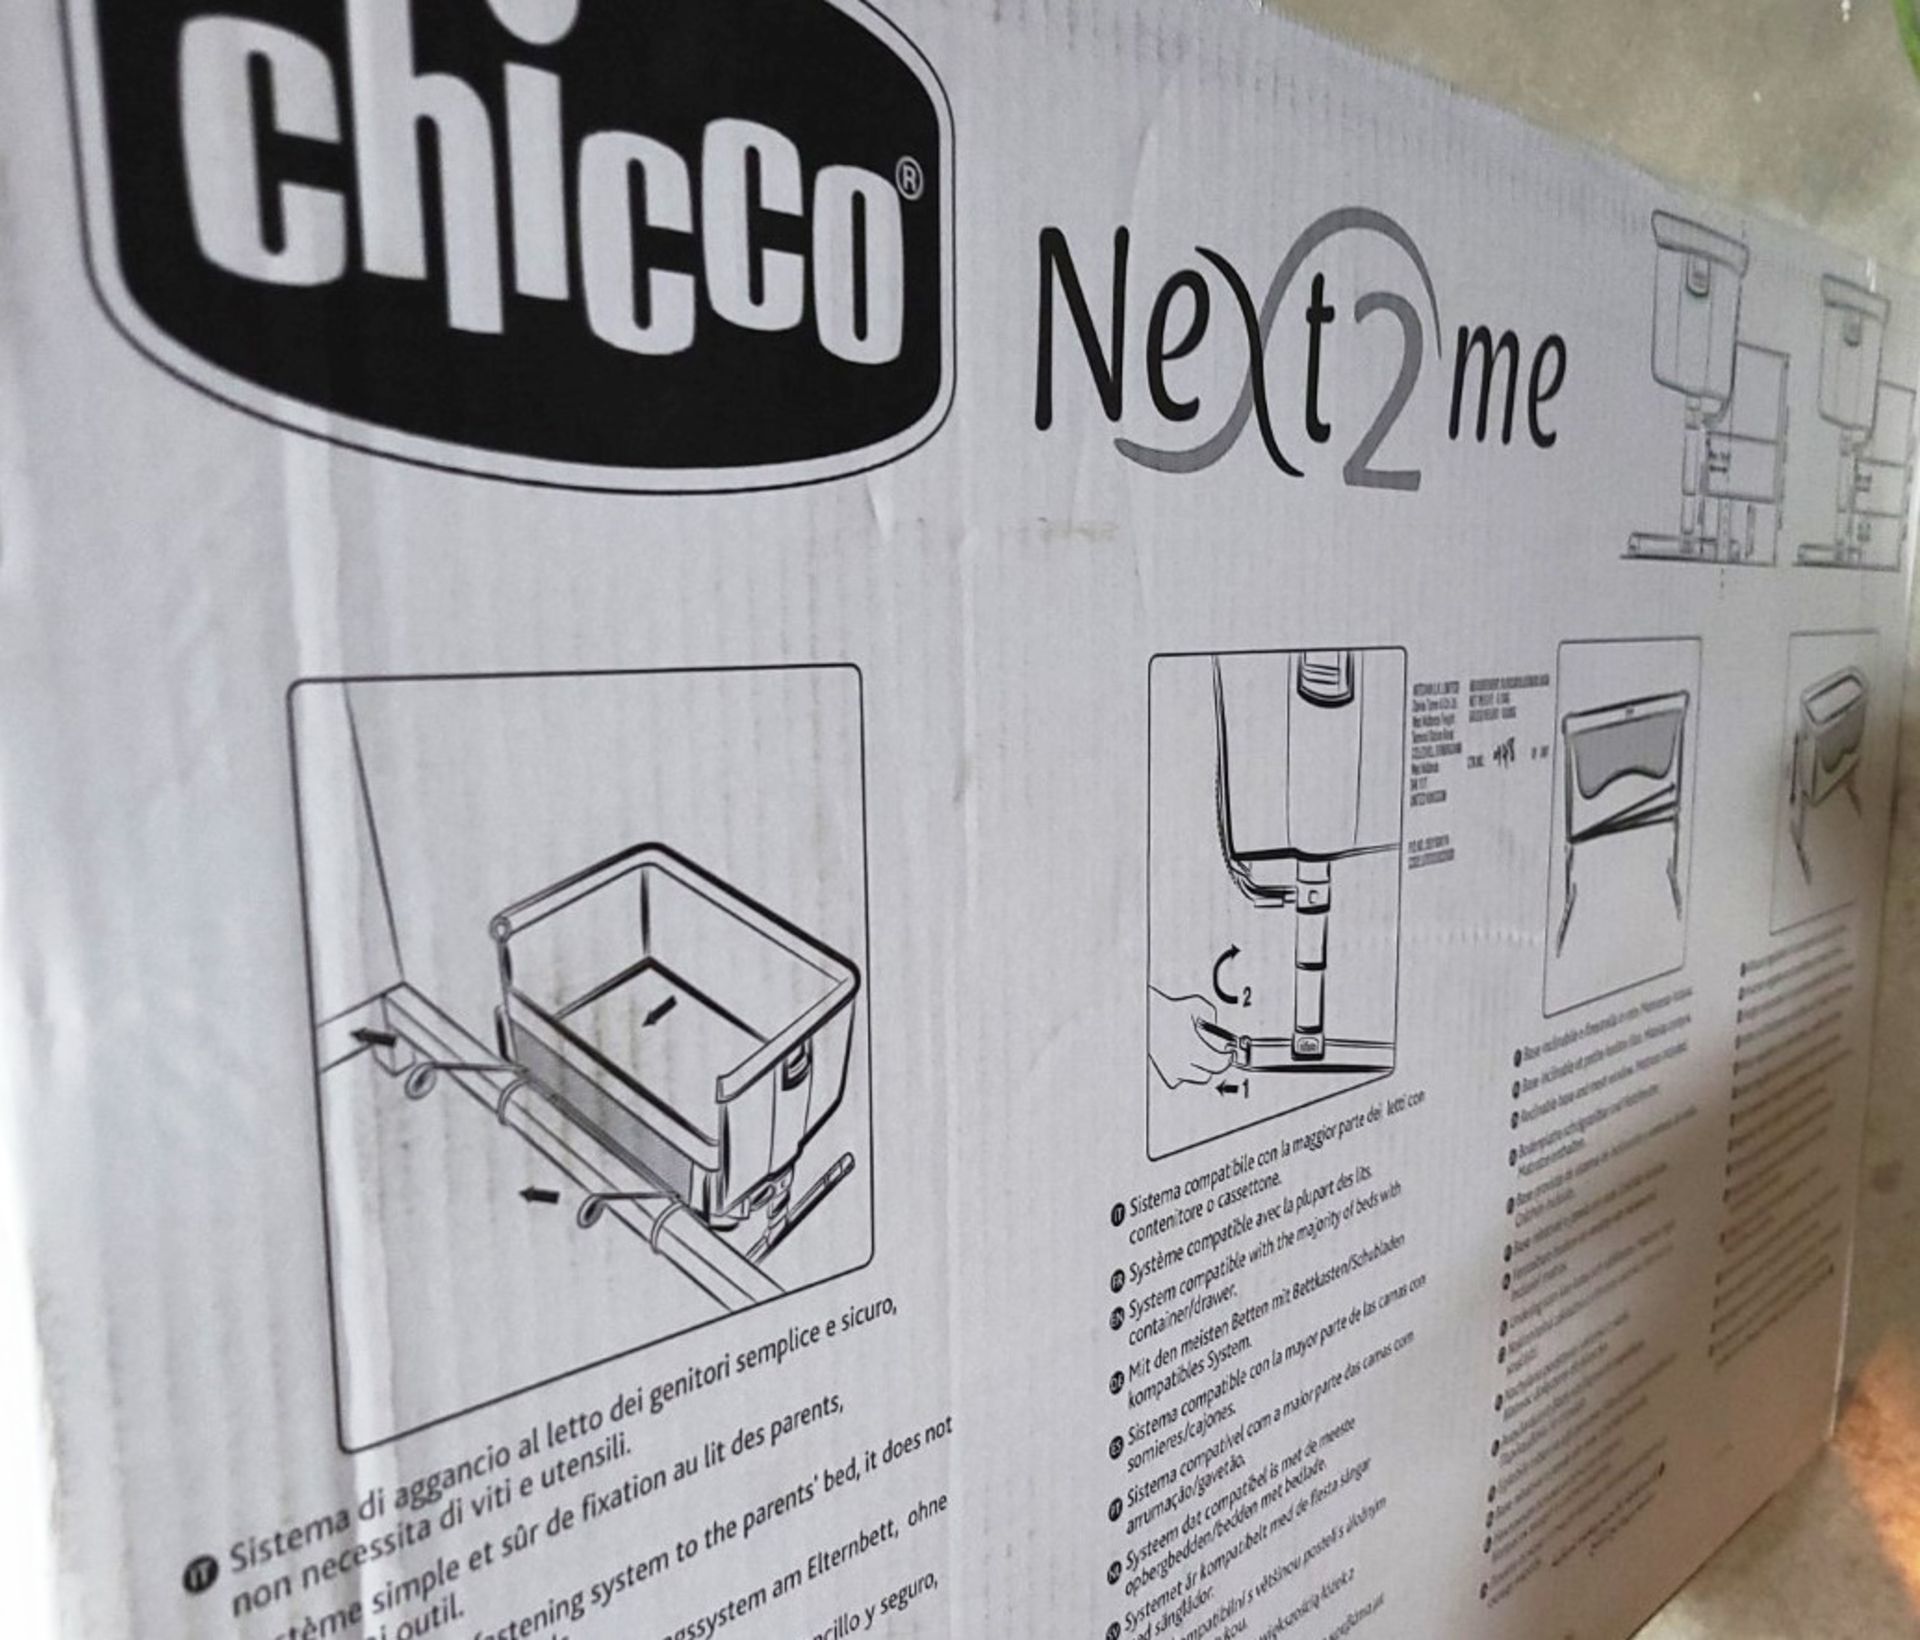 1 x CHICCO Next2me 'Chick to Chick' Bedside Baby Crib With Mattress - New Sealed Stock - RRP £299.00 - Image 6 of 6